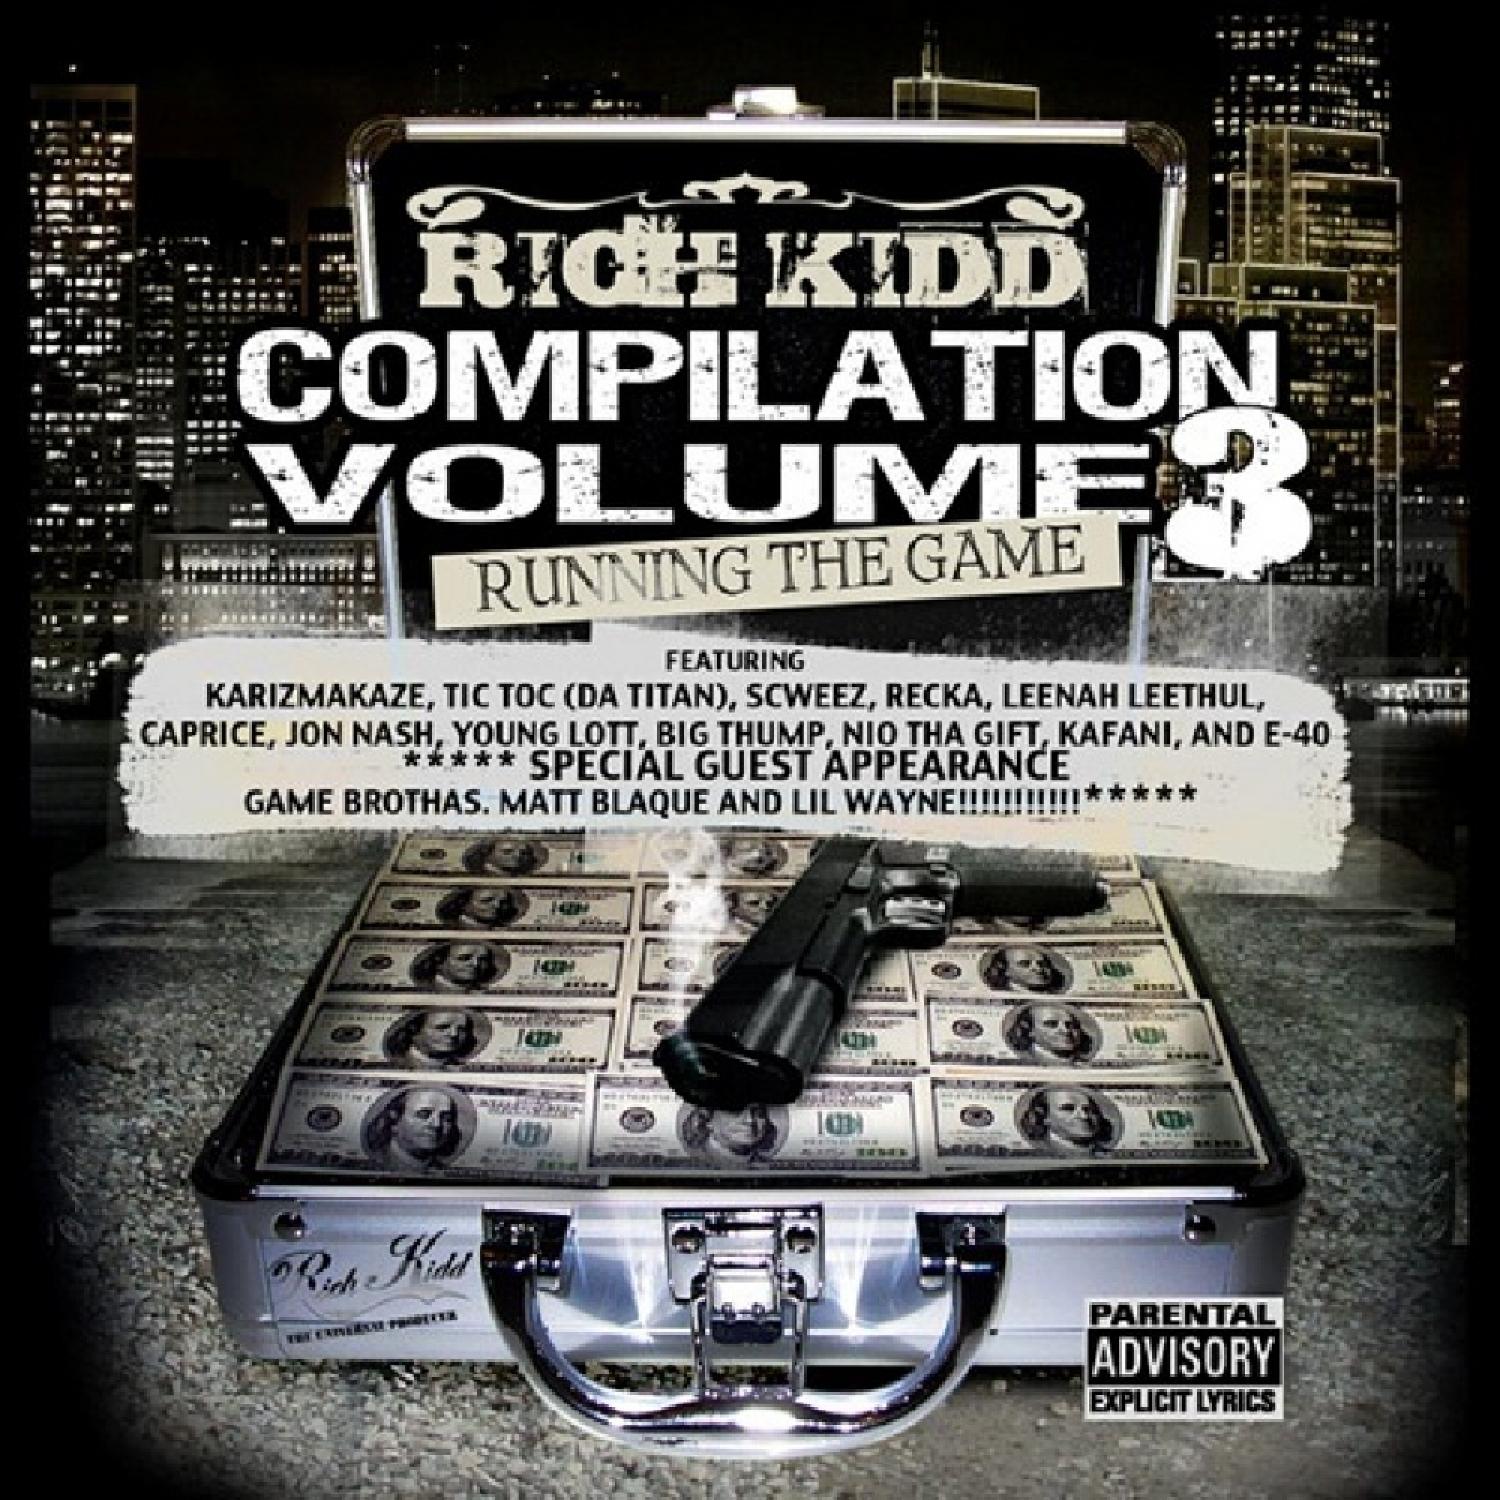 Rich Kidd Compilation Volume 3 Running the Game